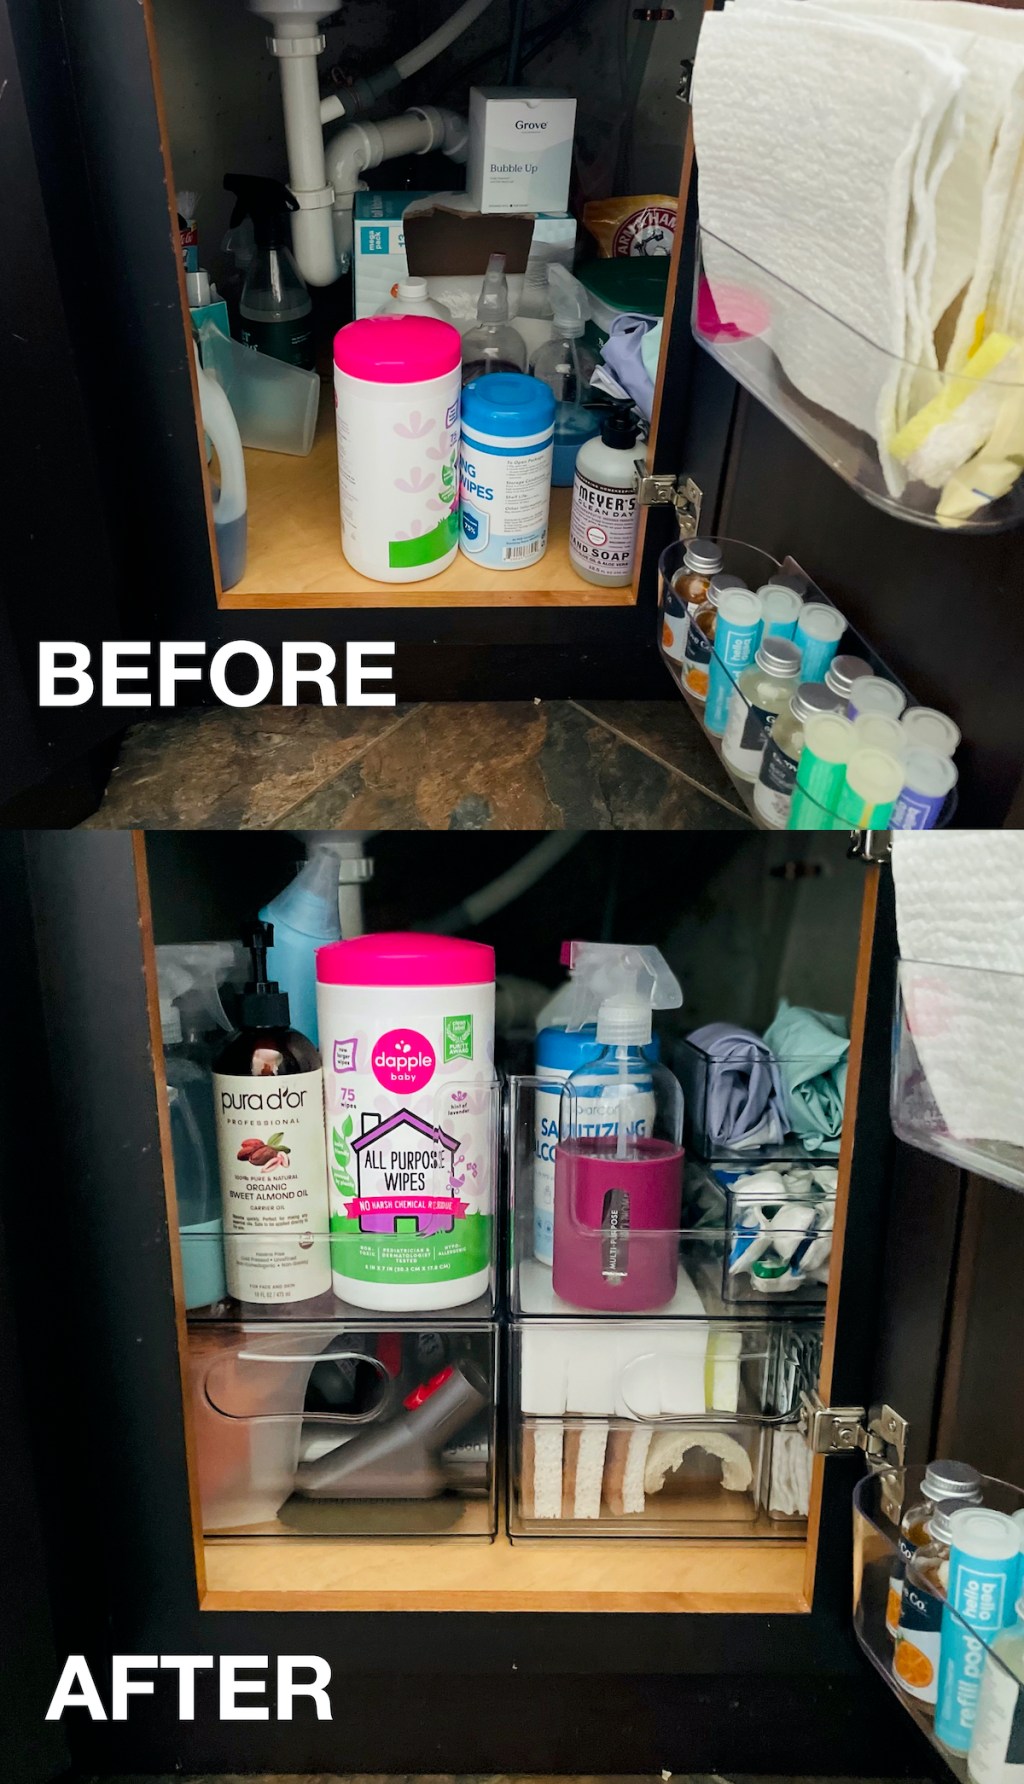 before and after of messy and organized kitchen sink